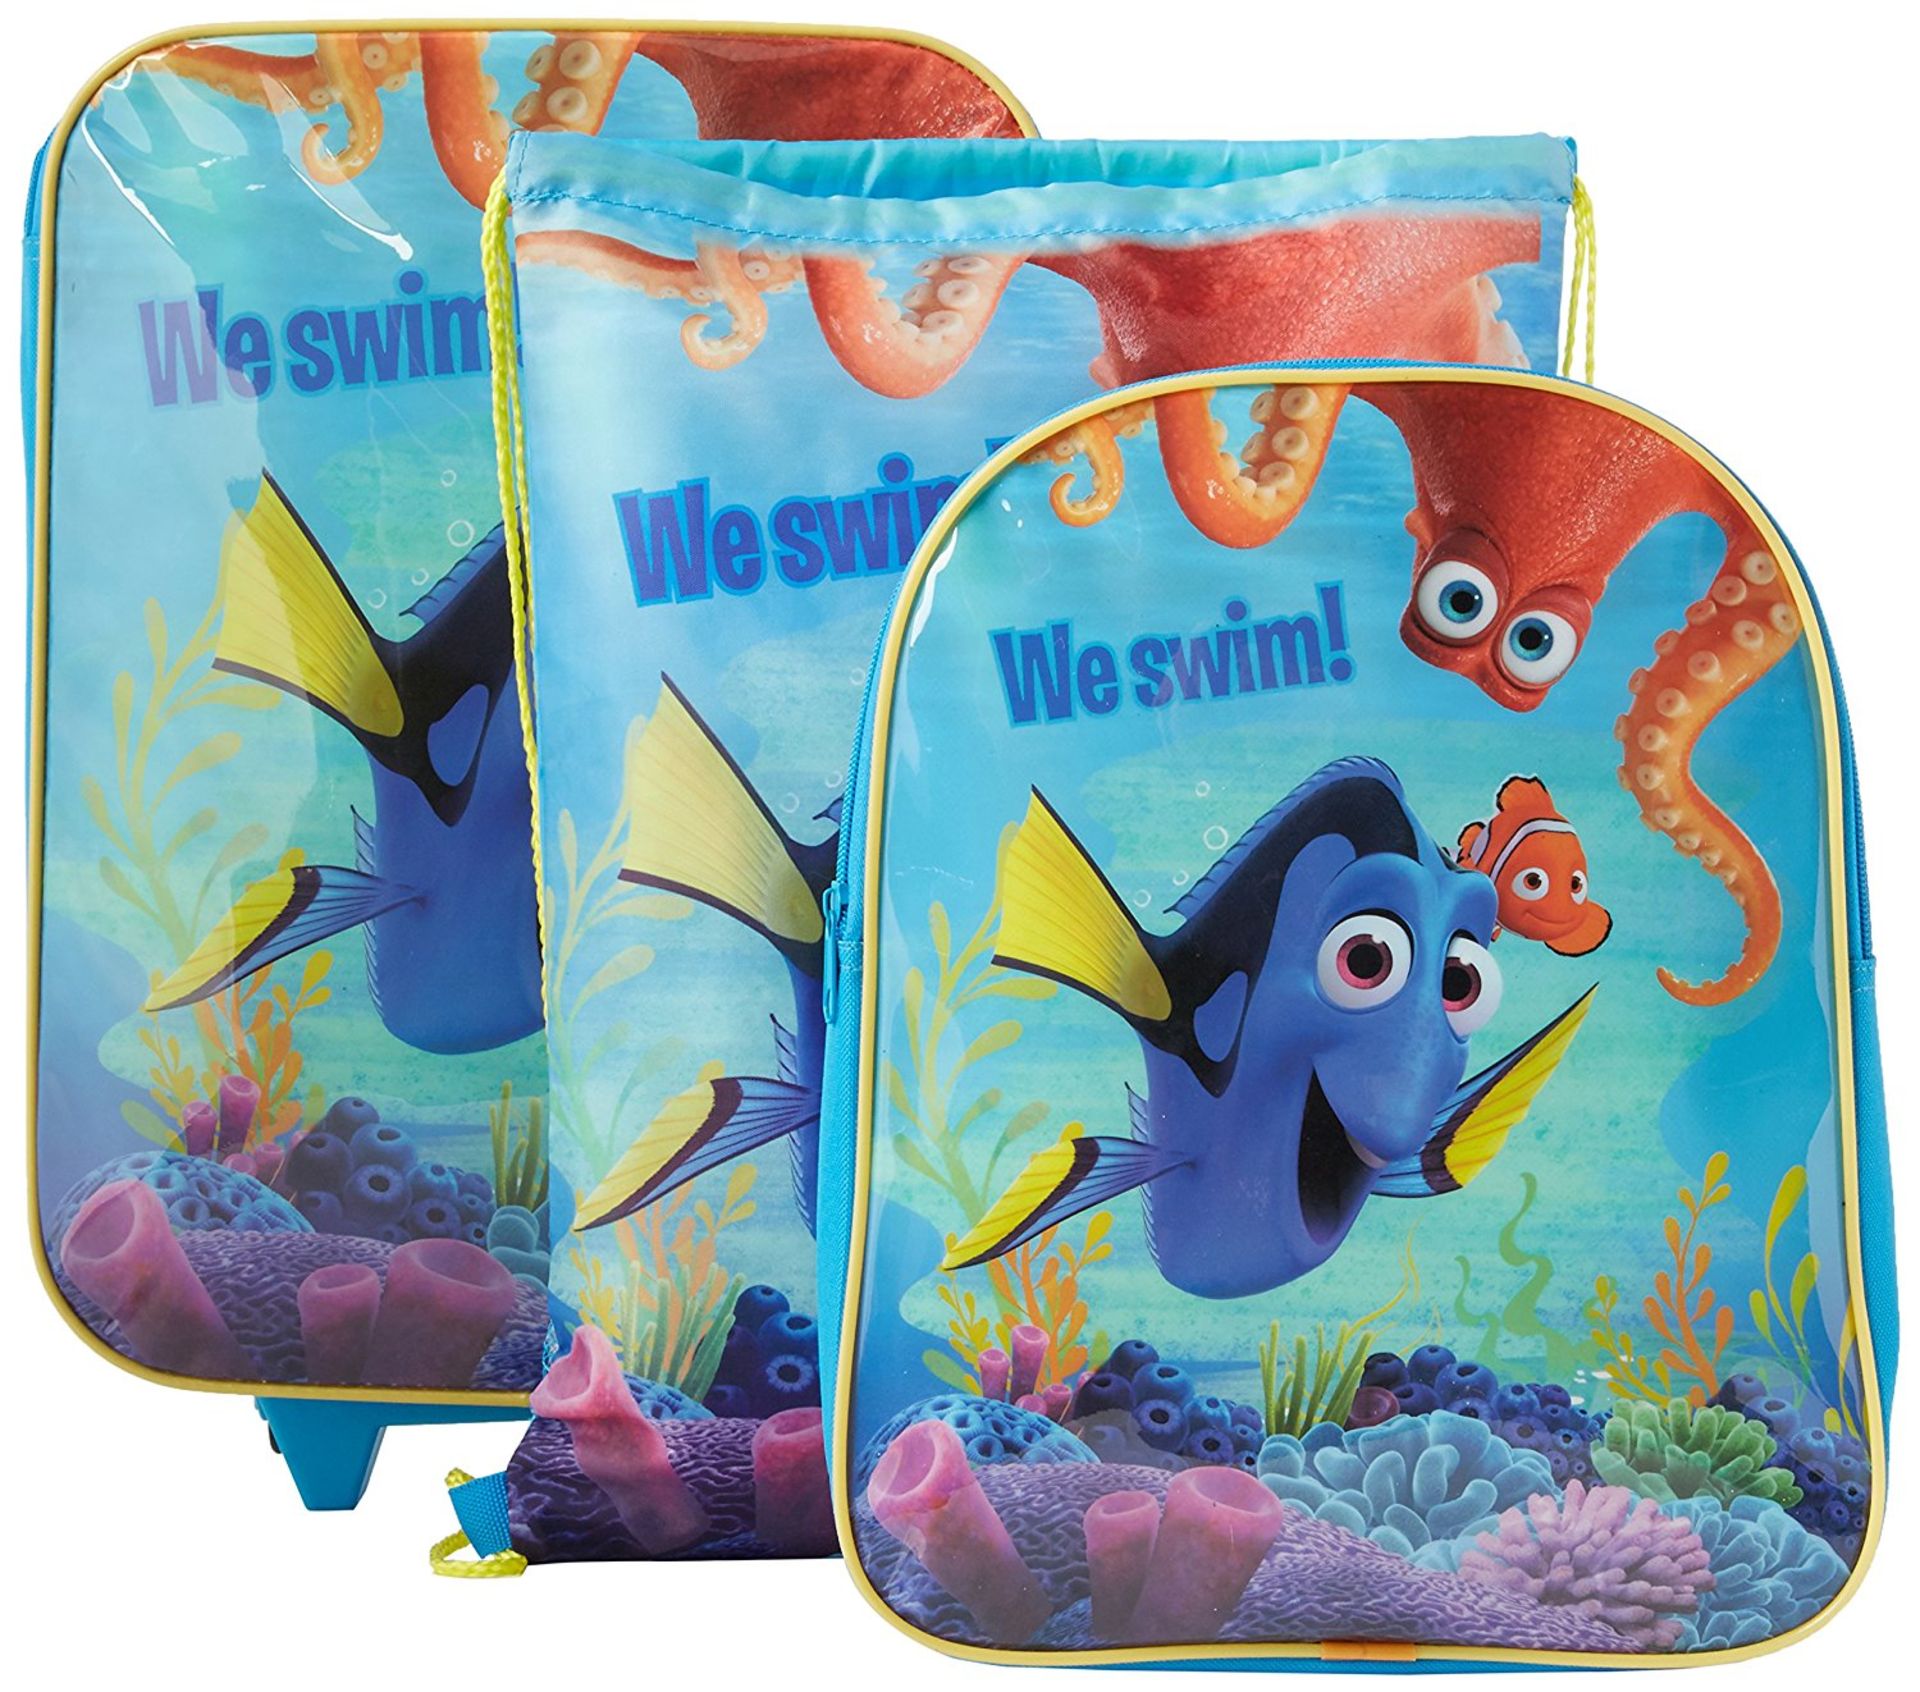 72 X Disney Finding Dory 3Pce Travel Trolley Luggage Set [Brand New In Retail Packaging] - Image 6 of 6